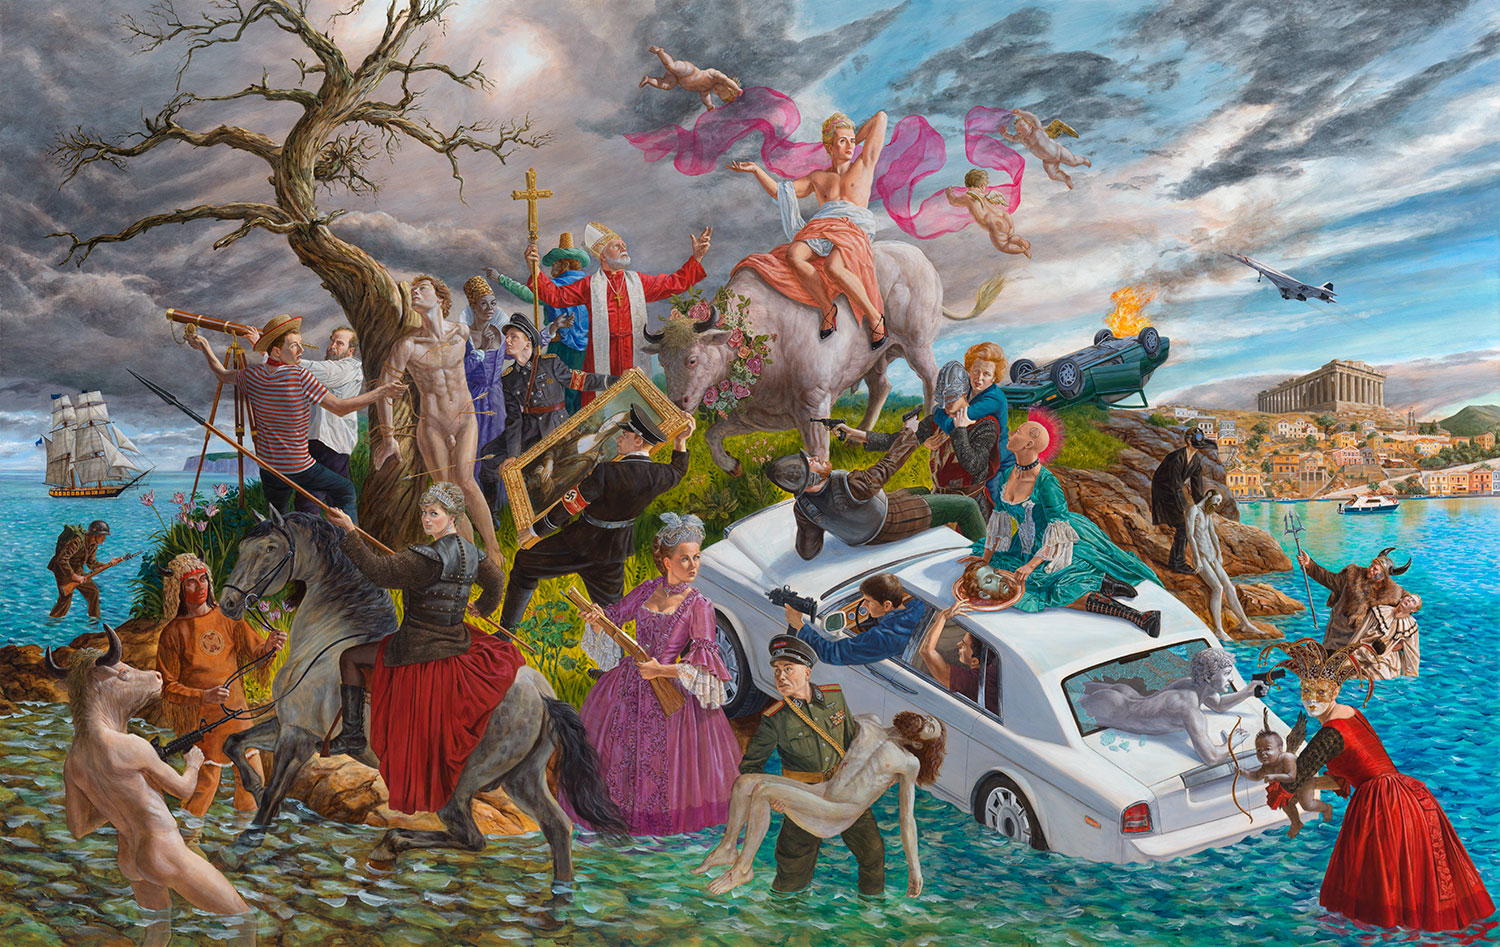 Miss Europe (2016) is part of Kent Monkman’s series The Four Continents, which riffs off a series of the same name by 18th-century Italian painter Gambattista Tiepolo.